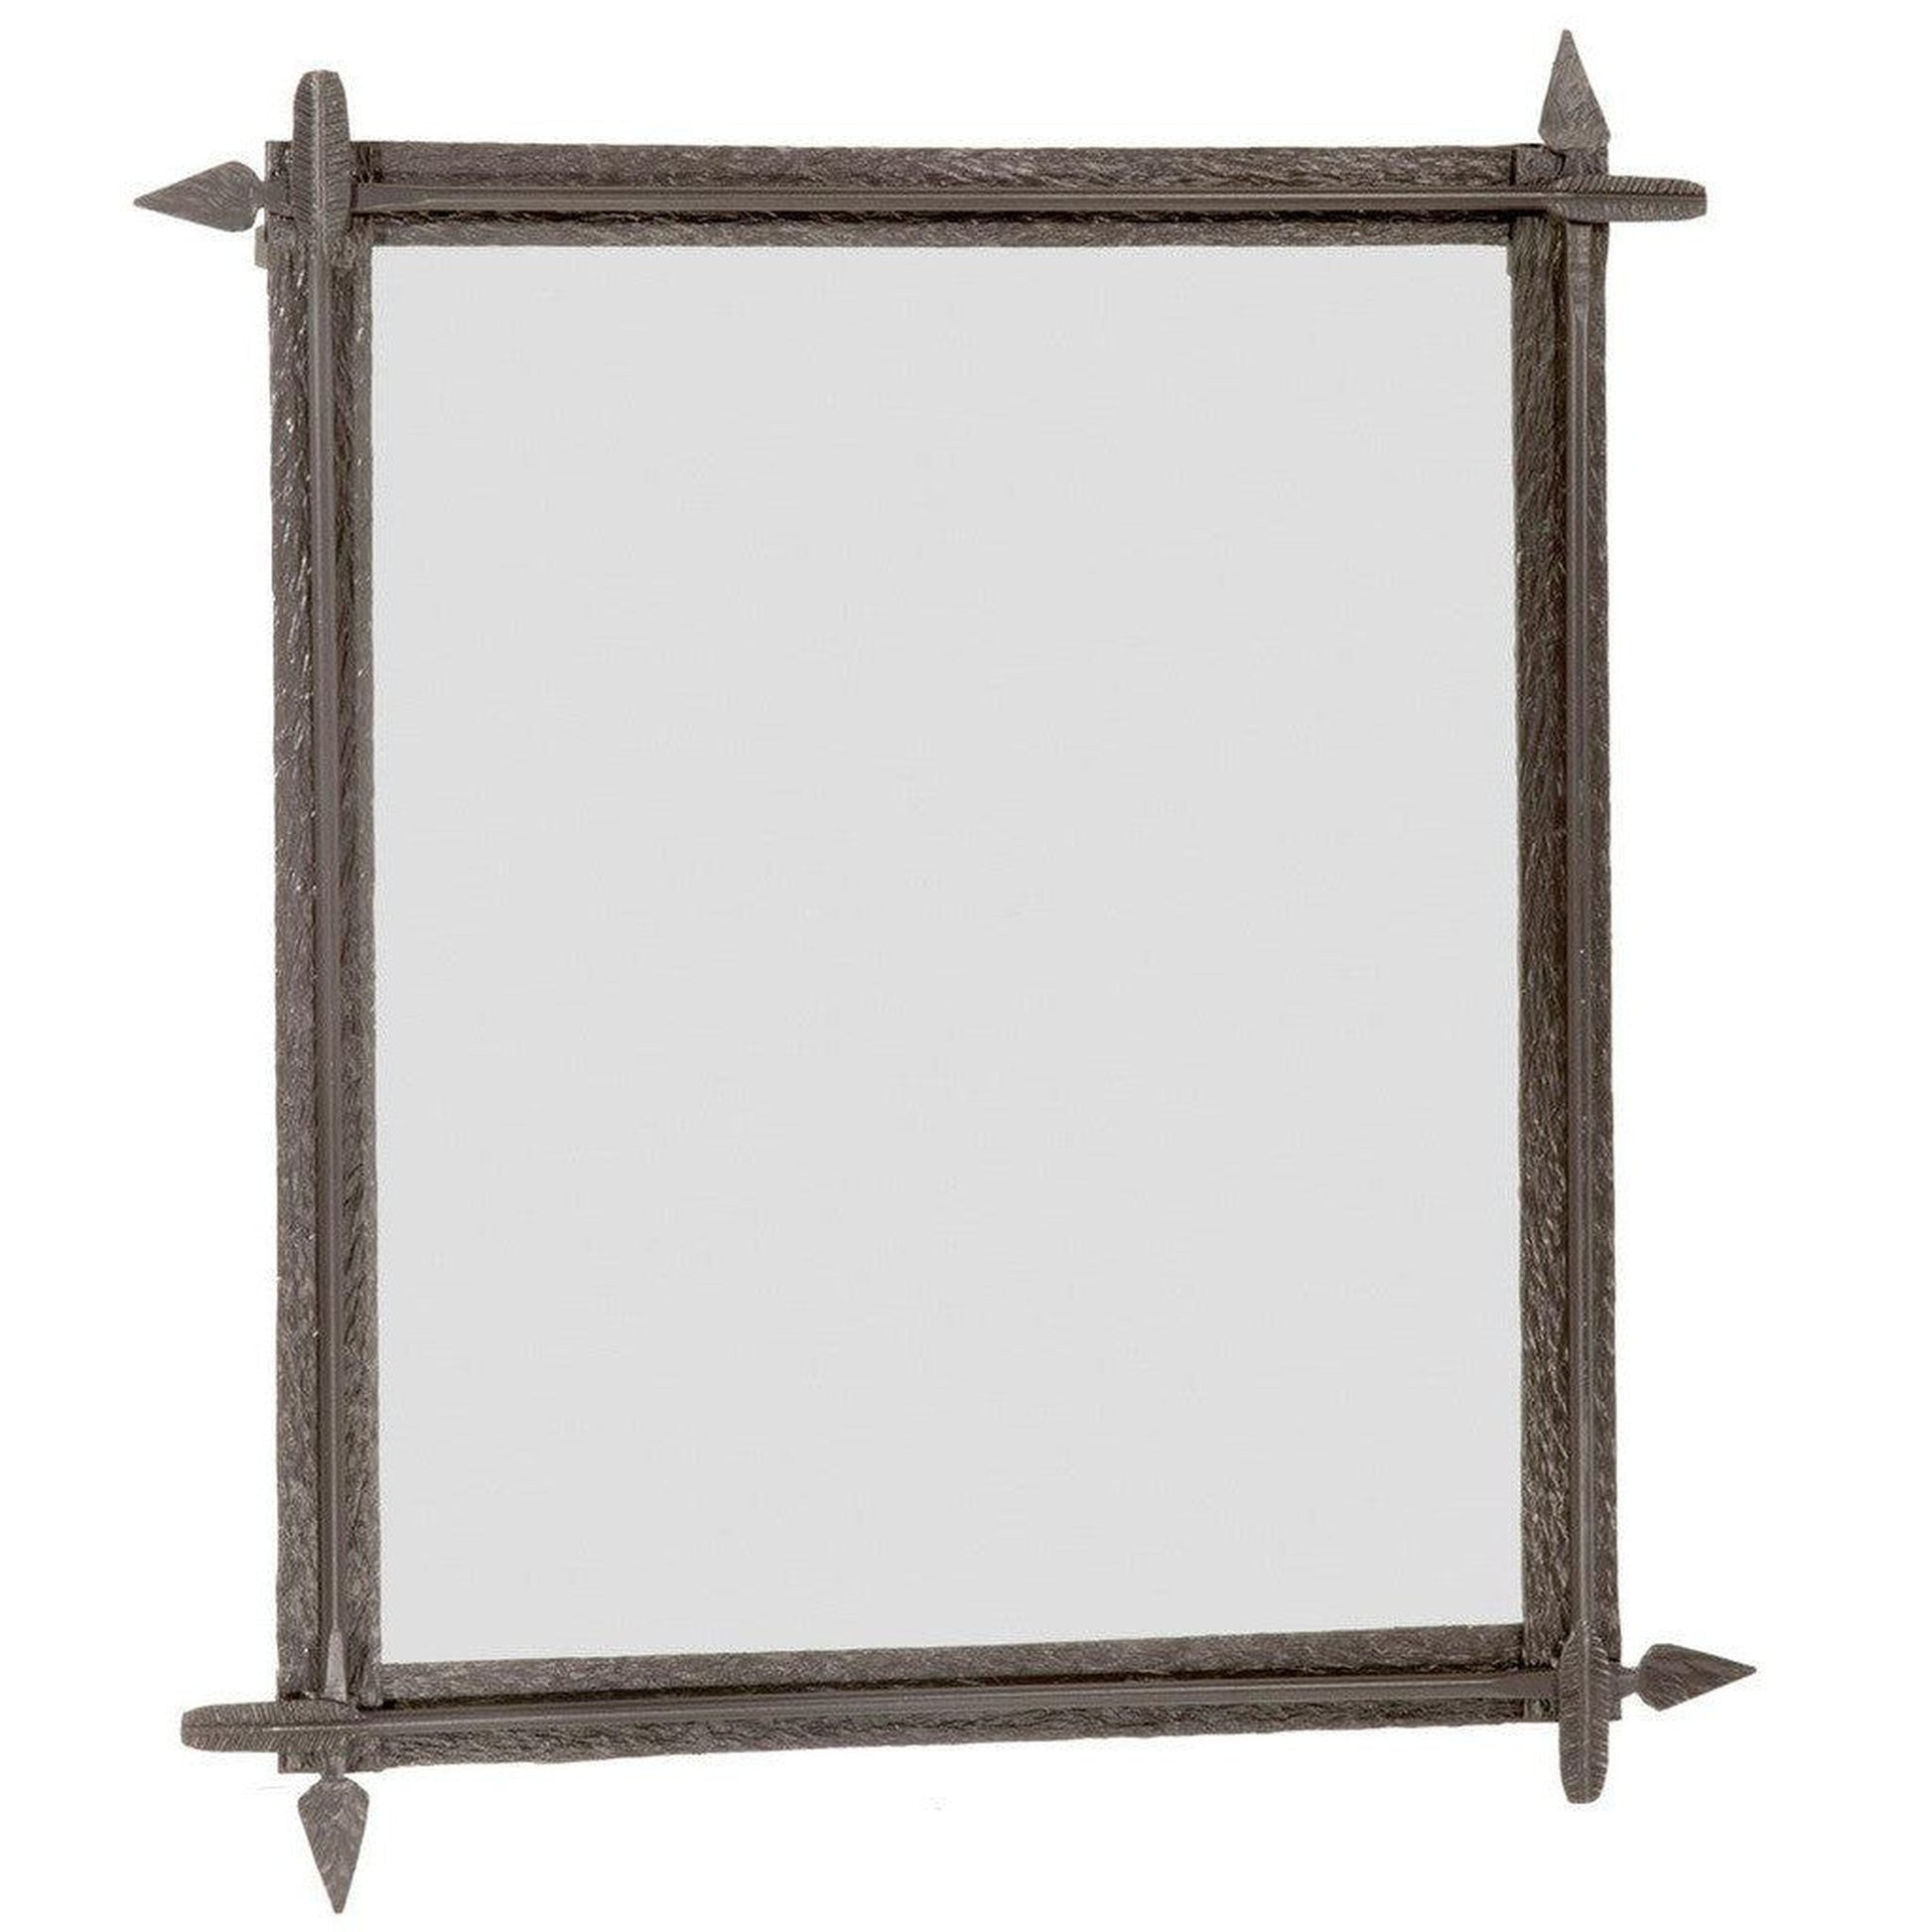 Stone County Ironworks Quapaw 28" x 32" Small Burnished Gold Iron Wall Mirror With Gold Iron Accent